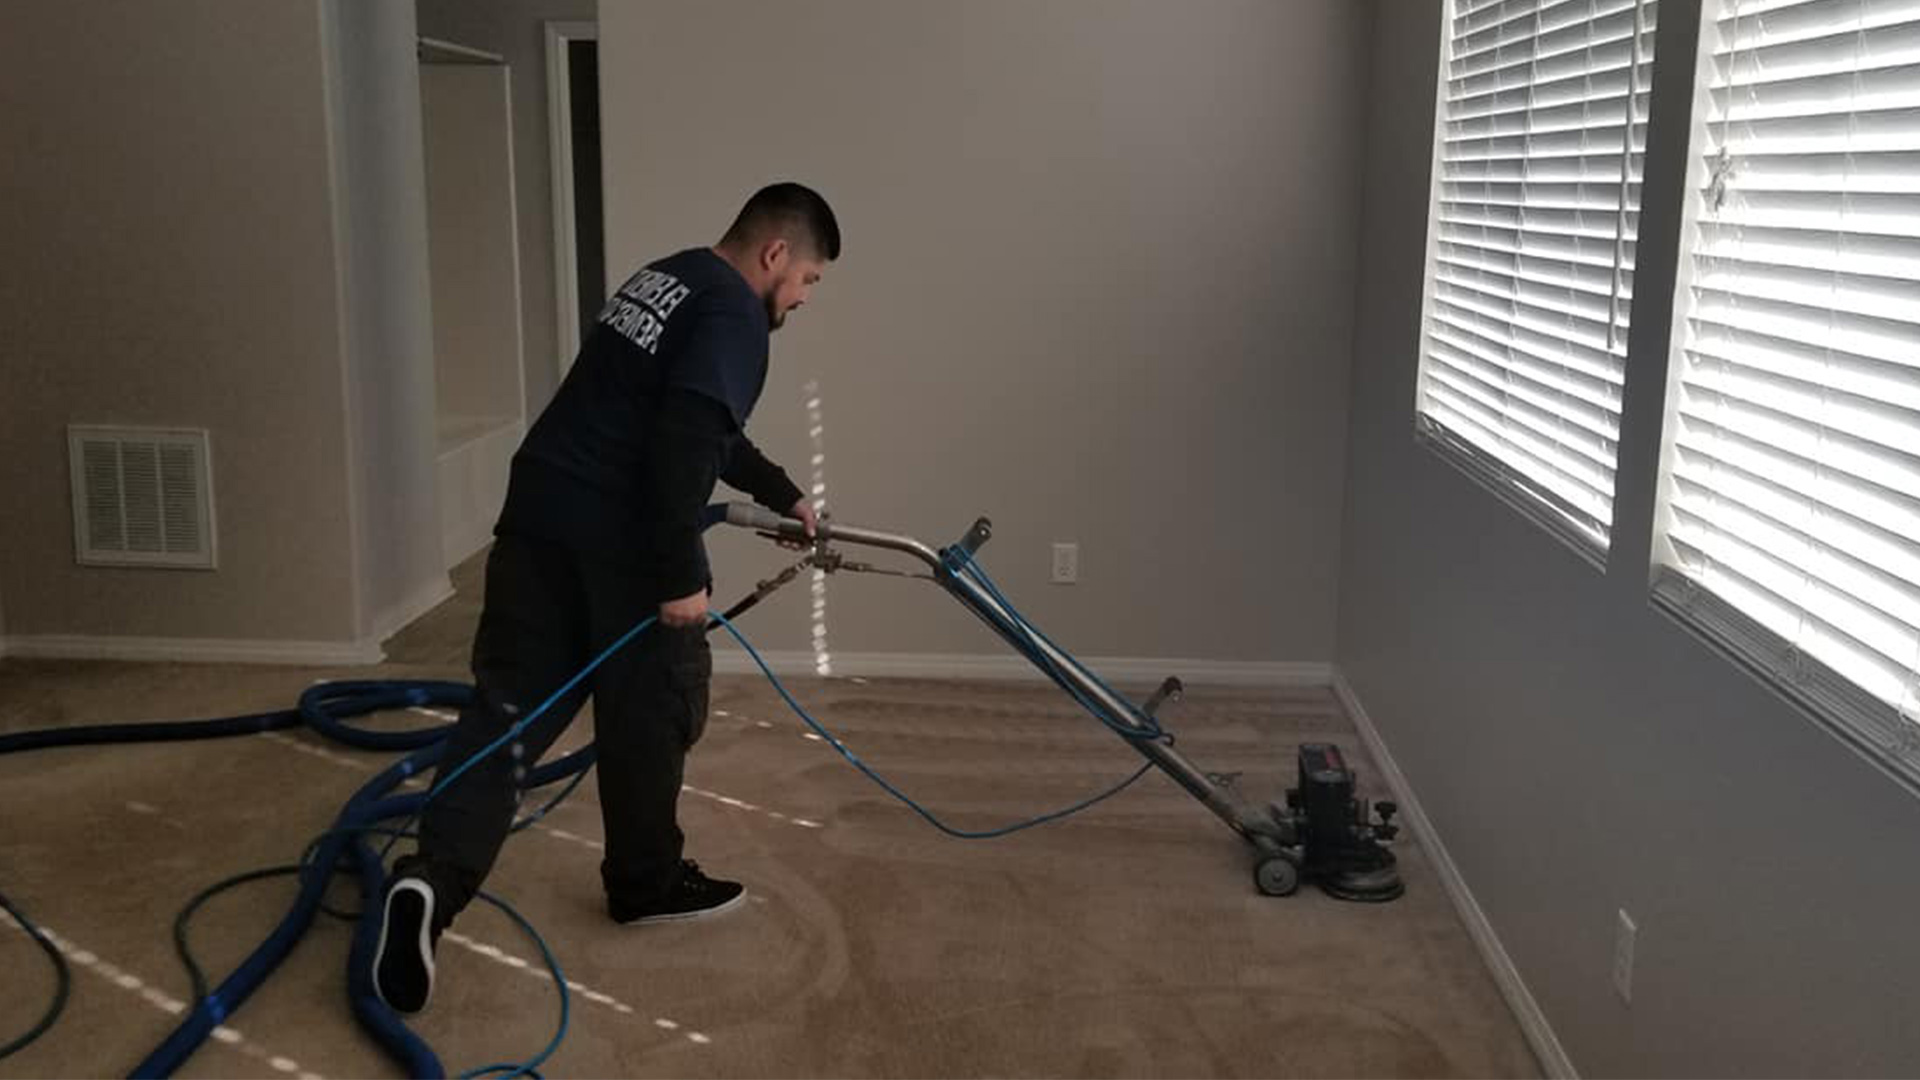 contractor drying carpet floor after water damage at residential property interiors